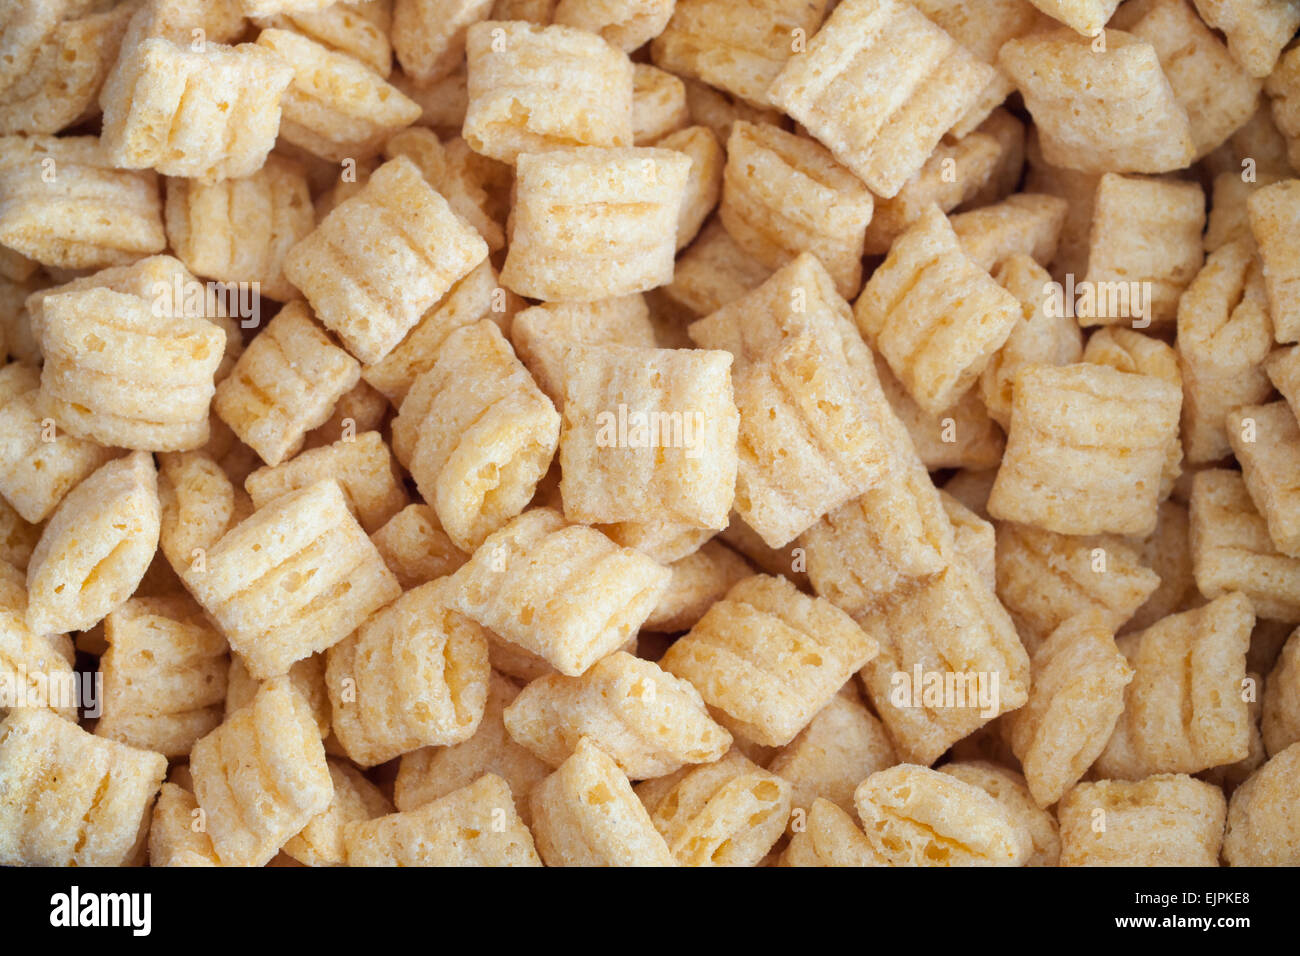 A close-up of Cap'n Crunch cereal (Cap'n Crunch breakfast cereal). Stock Photo